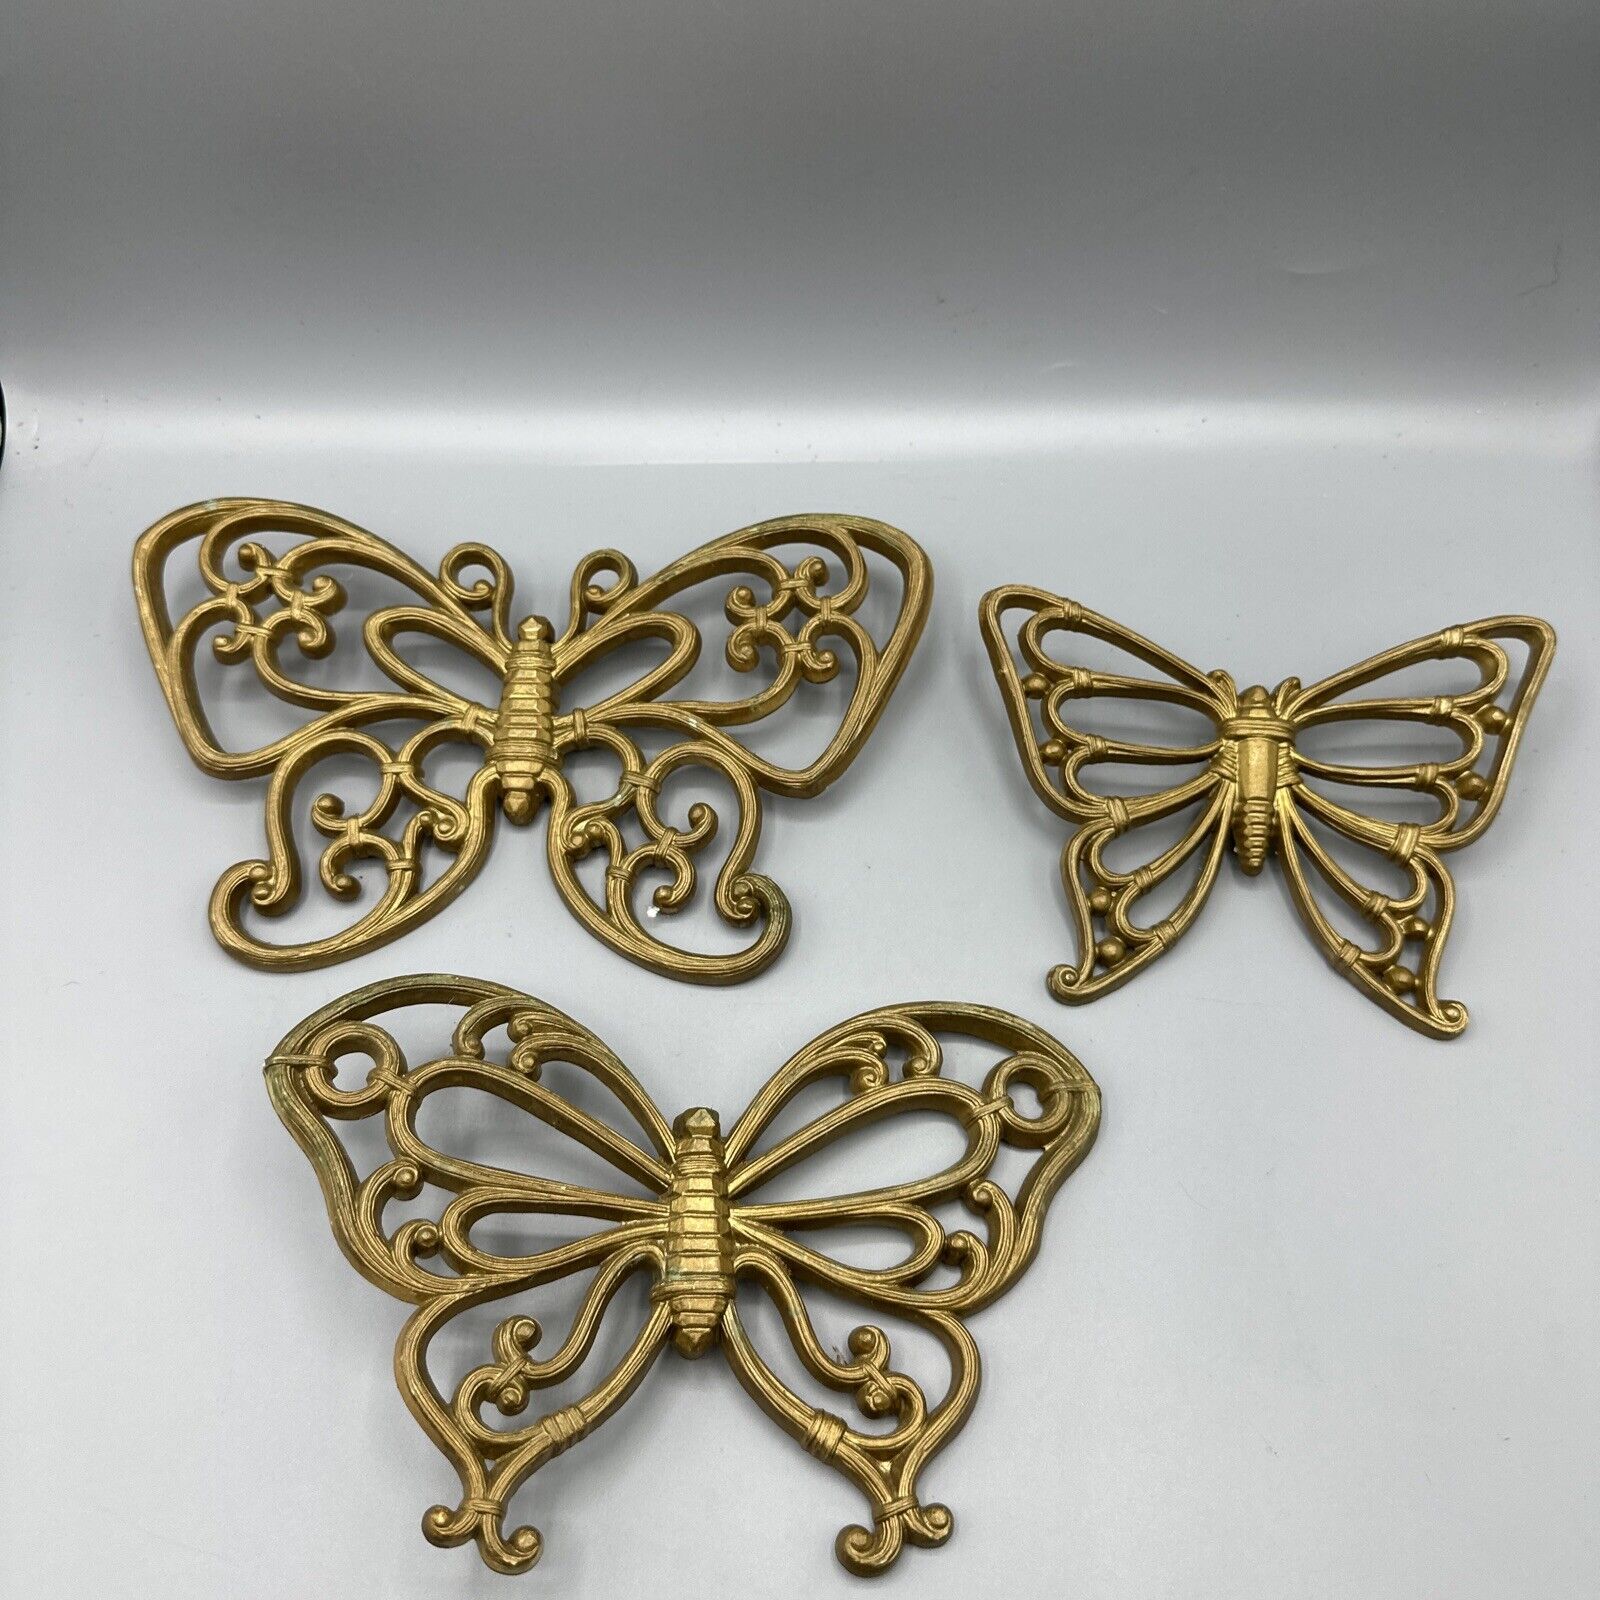 Vintage Homco Butterfly Faux Wood Wicker Wall Decor Gold 7537 Set/3 1978